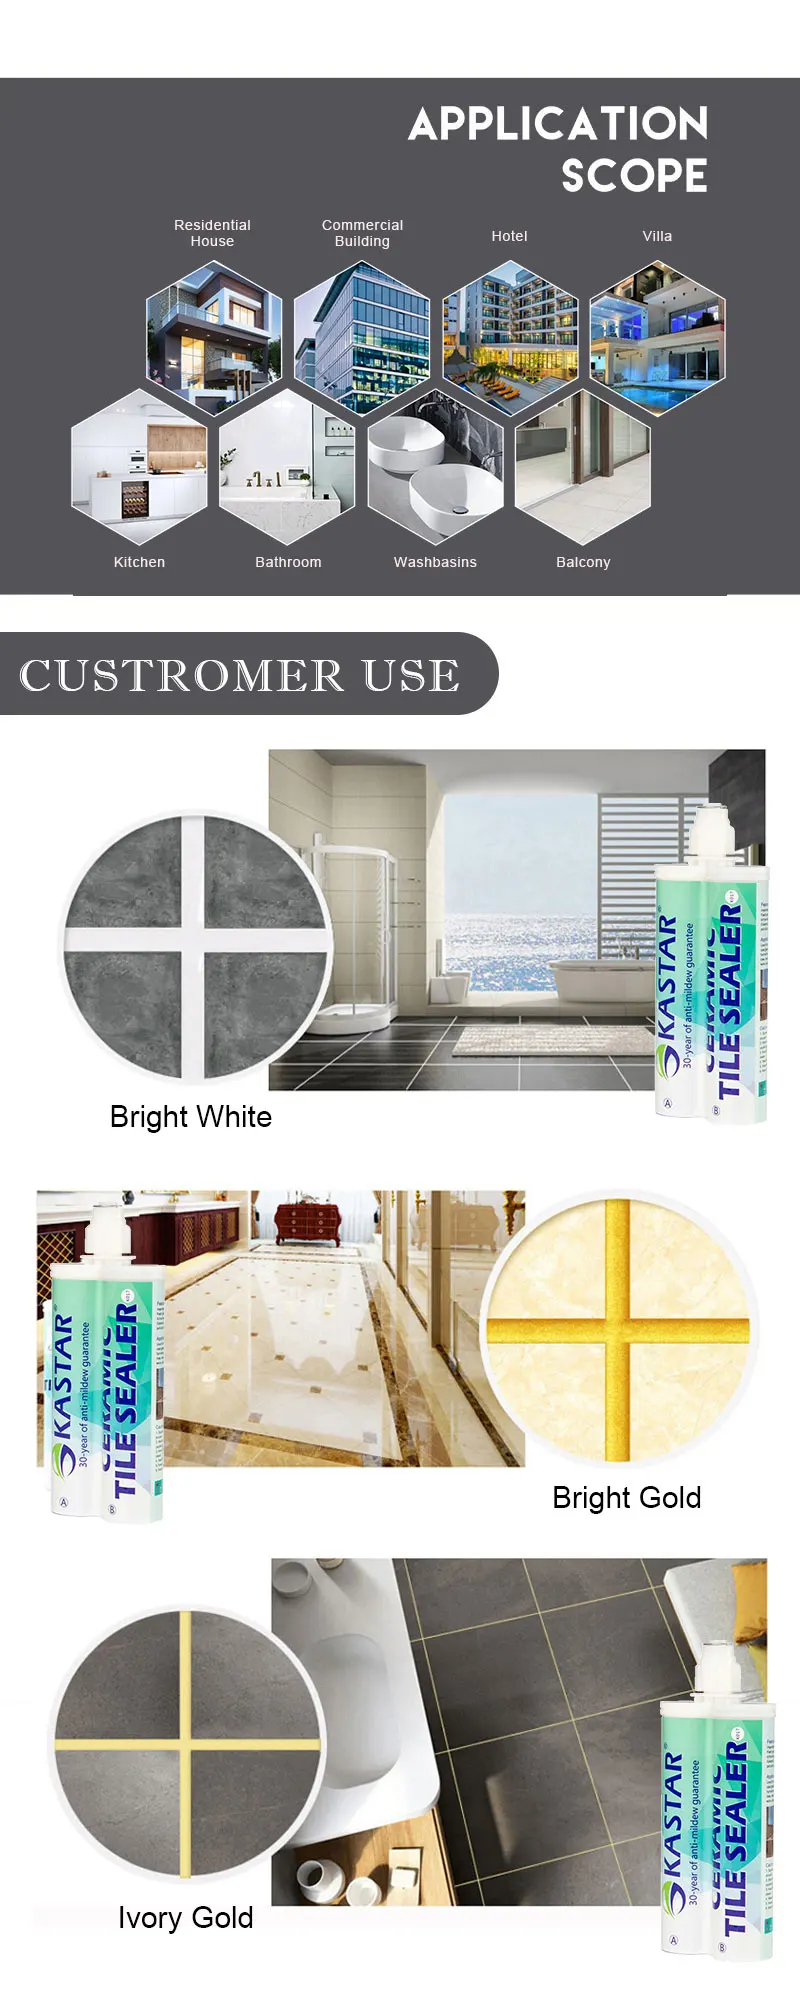 Easy To Install Double-Component Waterproofing Yellowing Proof Tile Bond Adhesive For Home Renovation